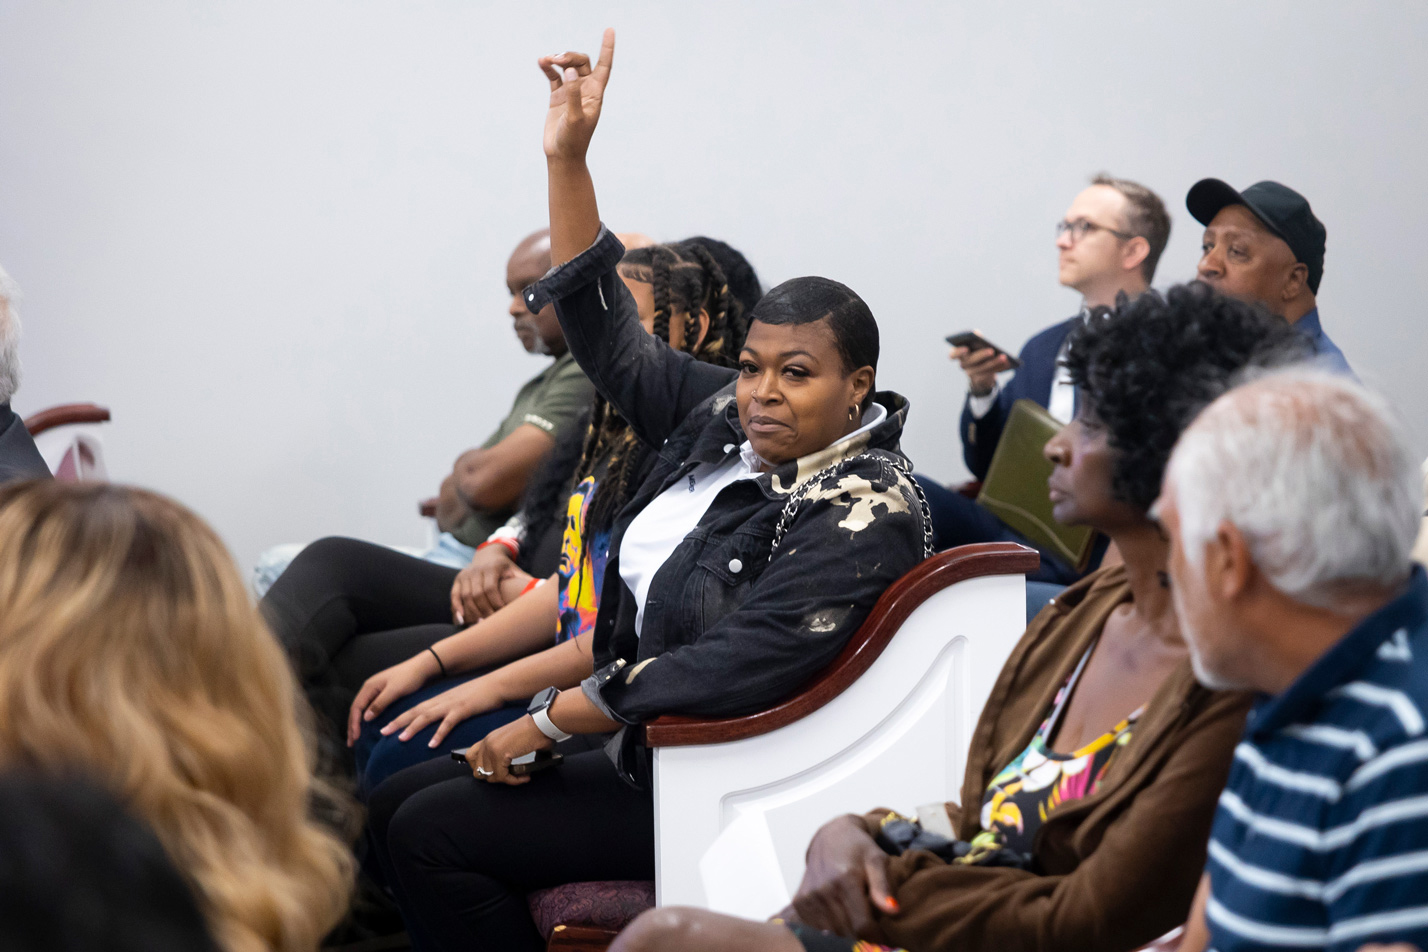 Arcola City Councilmember Ebony Sanco tries to ask questions after a city council meeting ended early April 9 in Arcola. A private investigator hired by Arcola's mayor said he obtained the addresses of Sanco's children from a Fort Bend ISD school, drawing Sanco's ire.